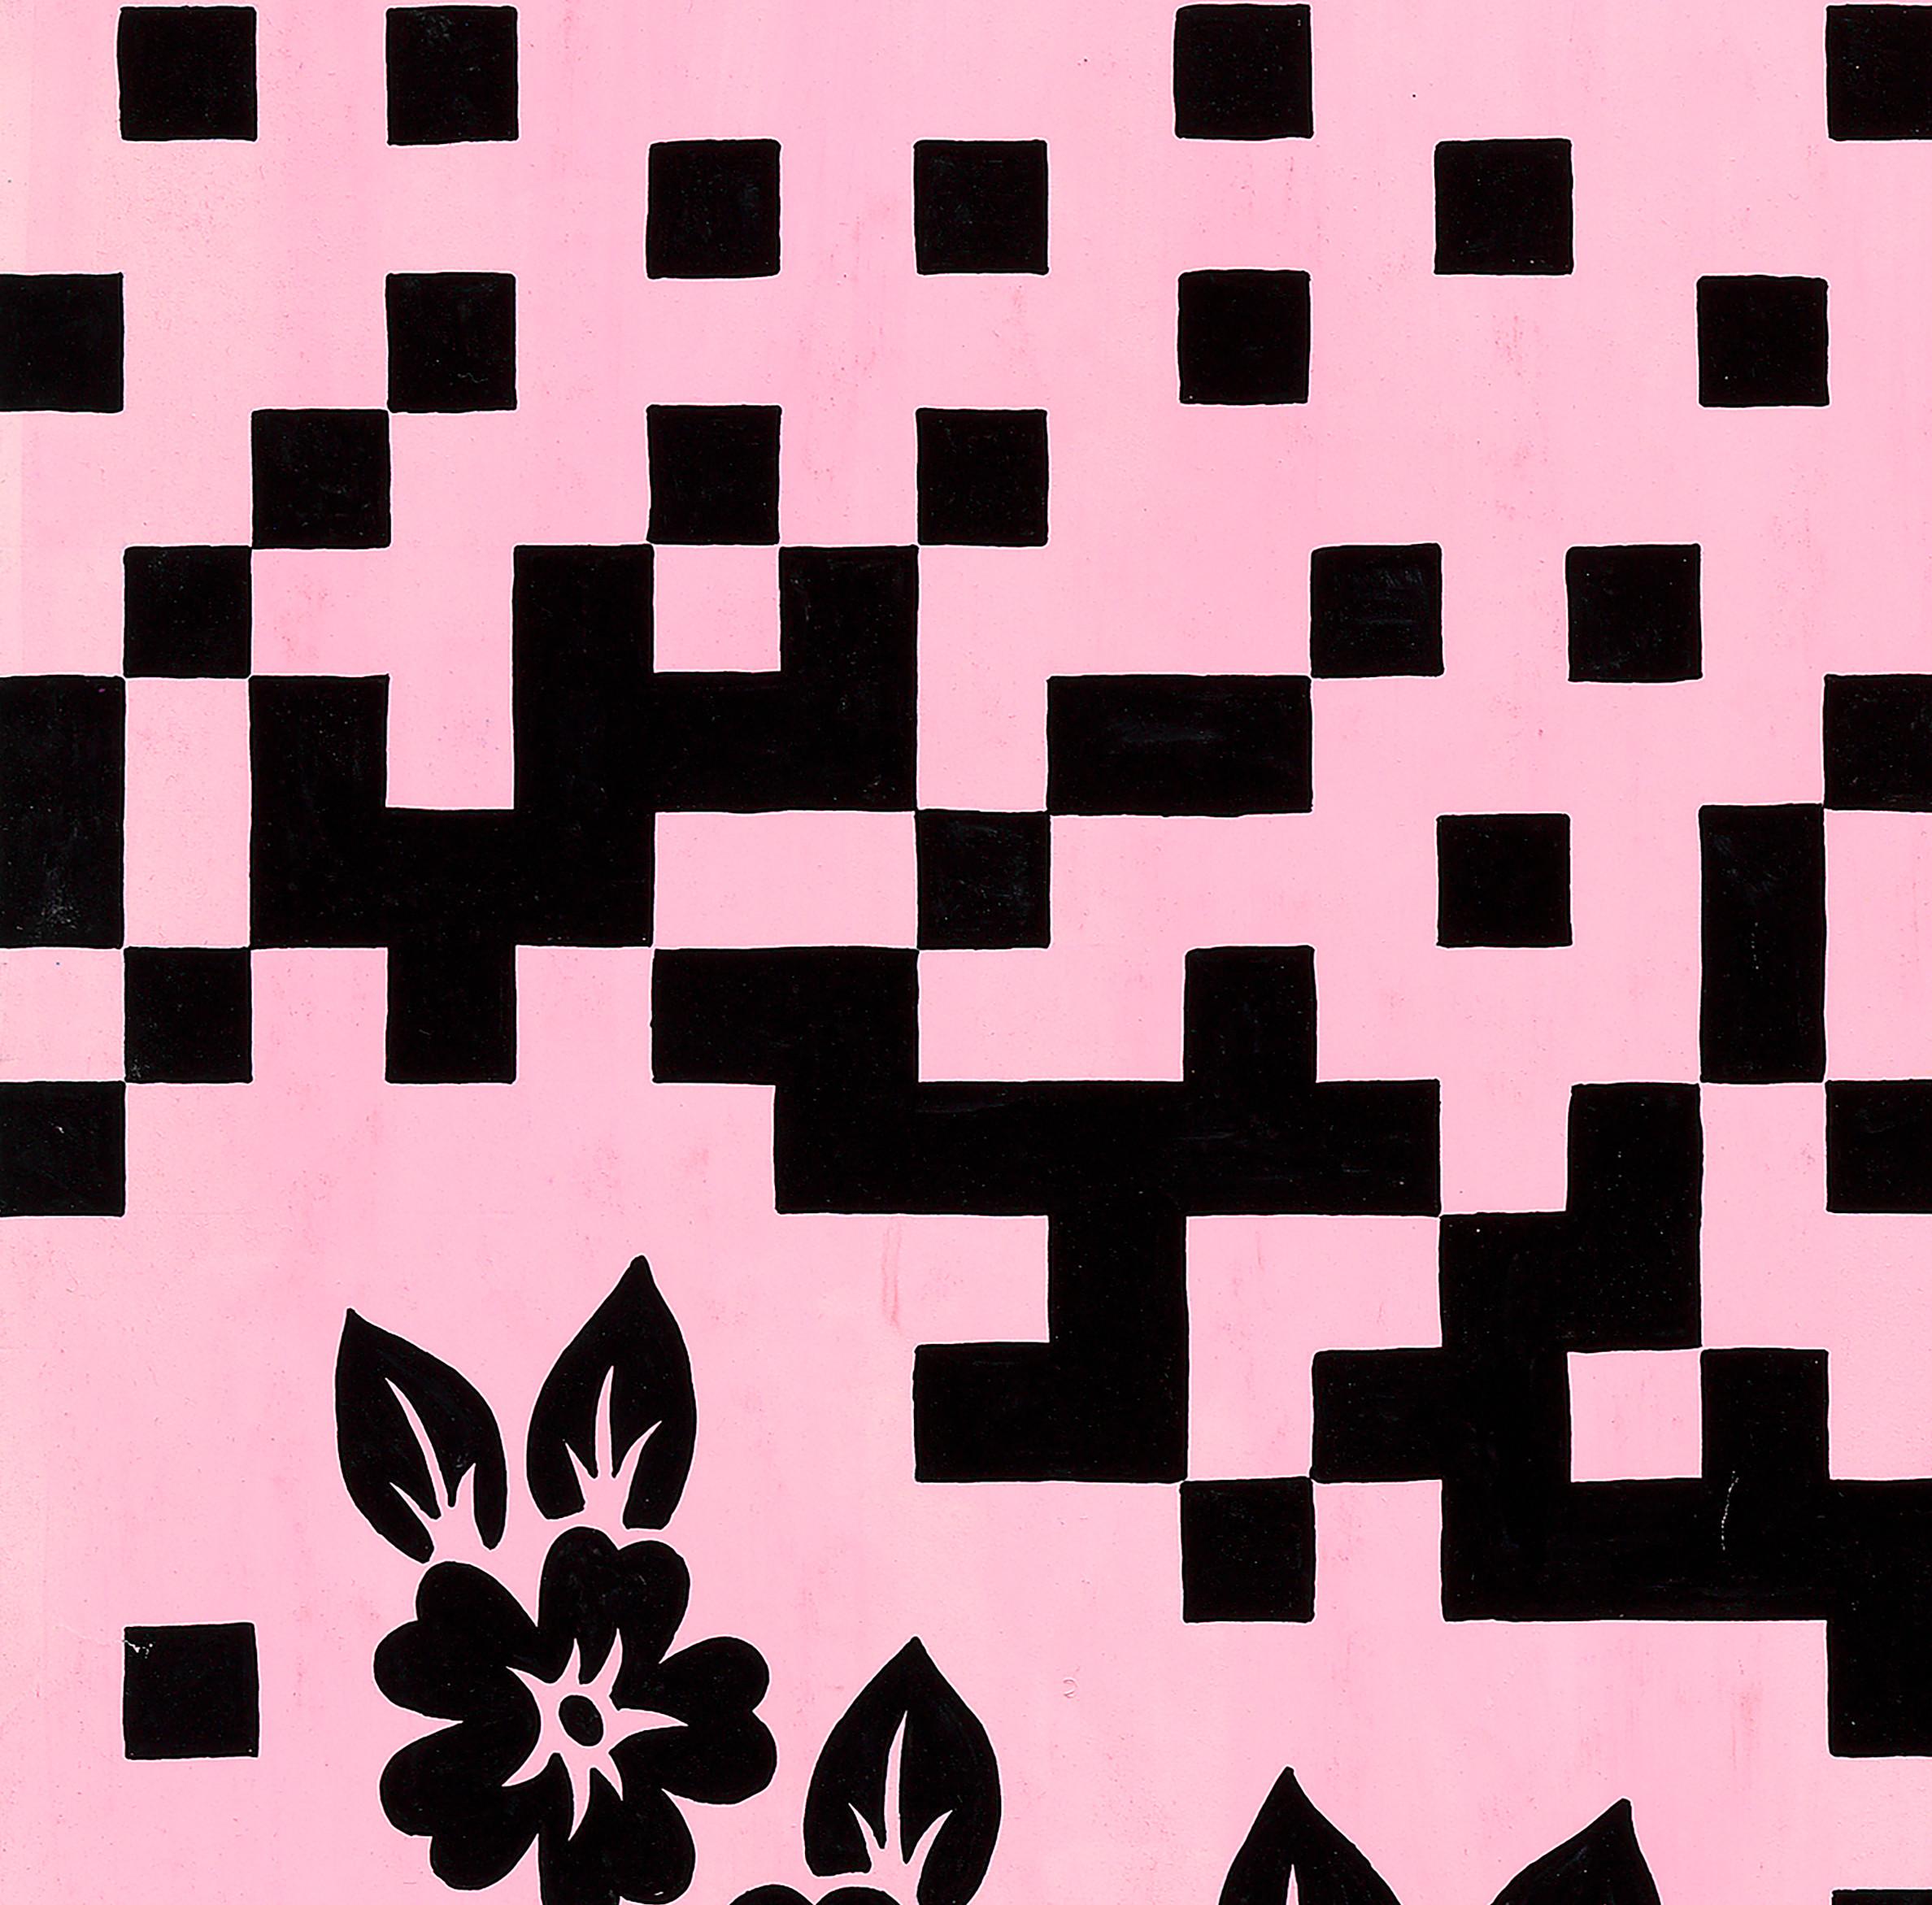 Original 70's Hand Painted Textile Design Gouache Pink & Black Color on Paper - Modern Art by Unknown